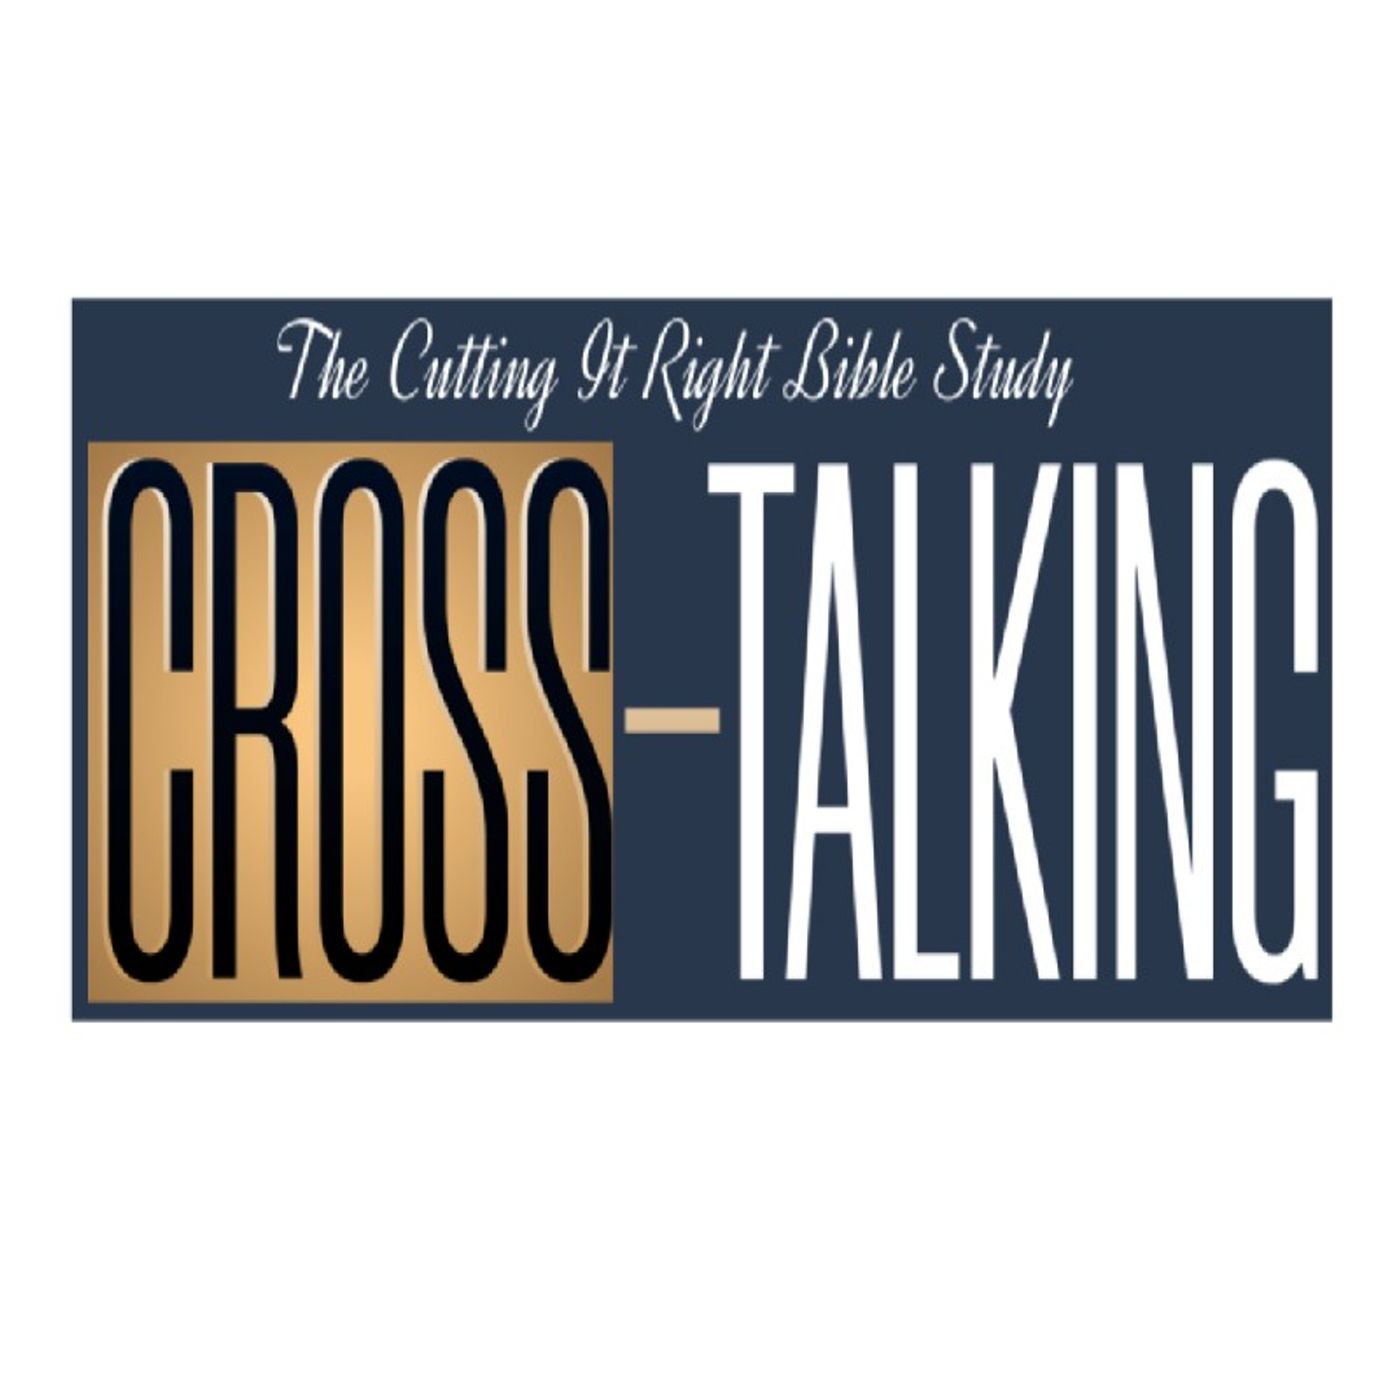 The Cutting It Right Bible Study | Cross-Talking: 'Discovering The Meaning' (part 3)